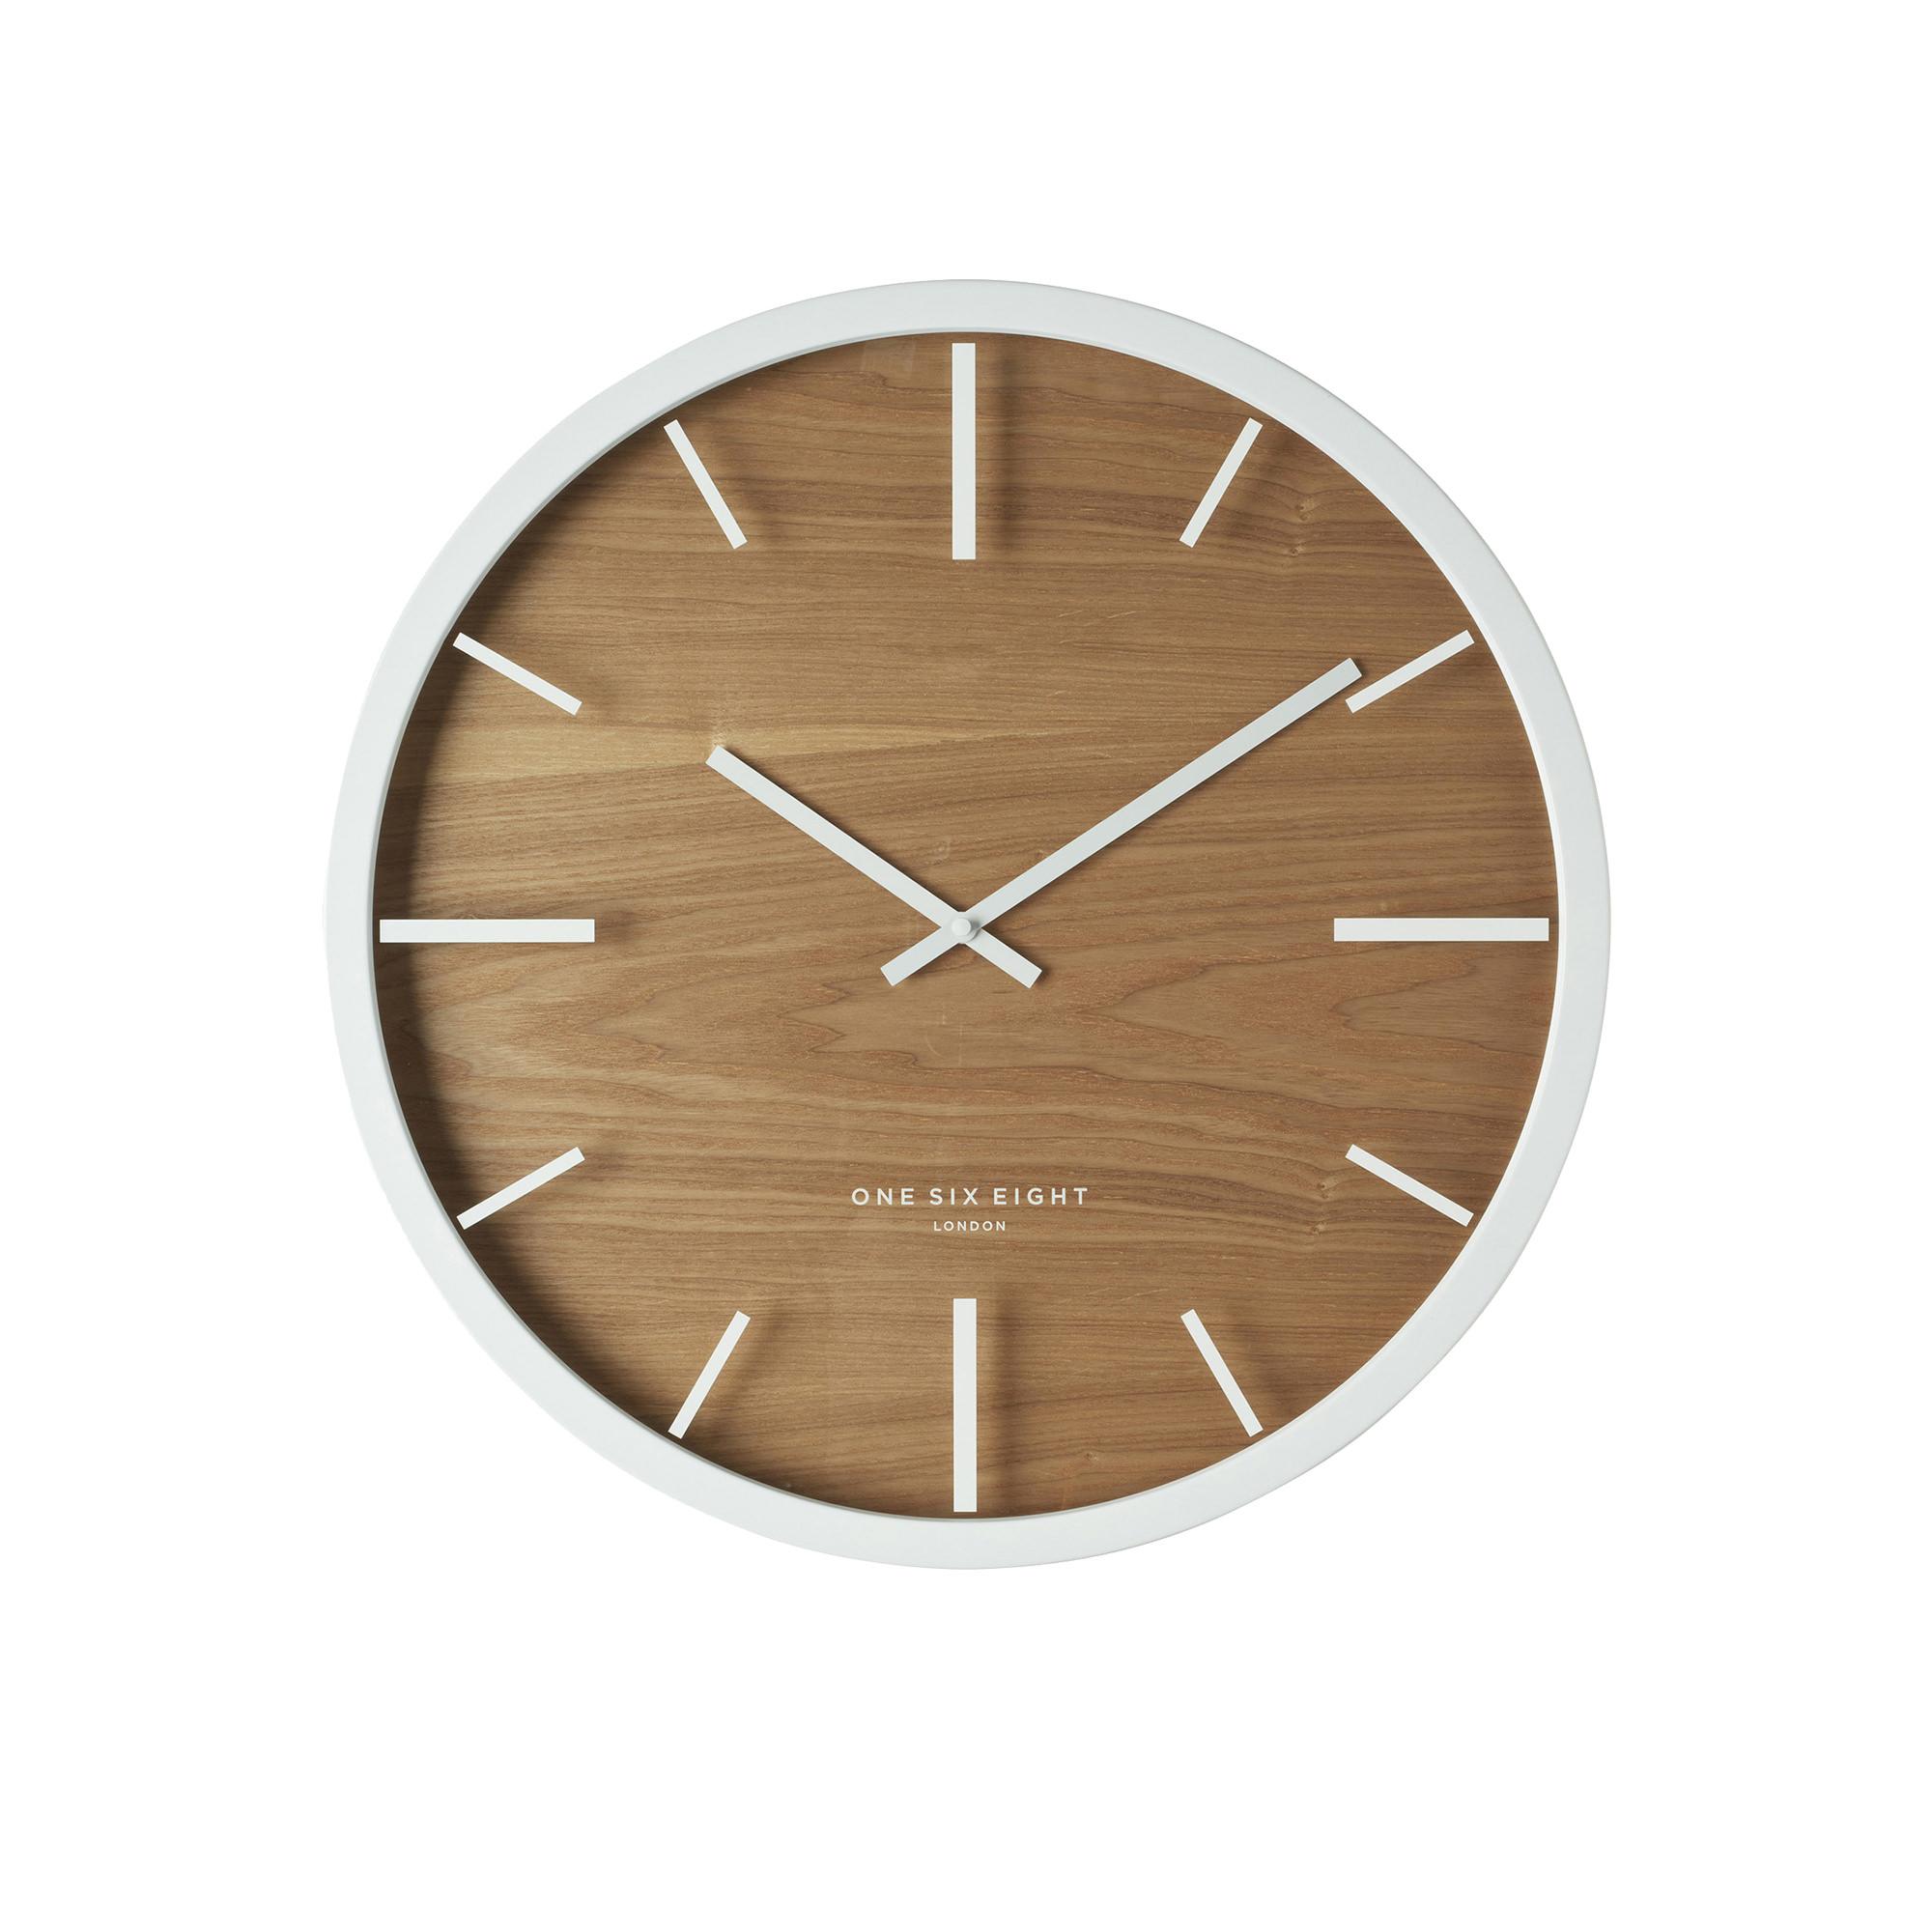 One Six Eight London Willow Silent Wall Clock 30cm White Image 1